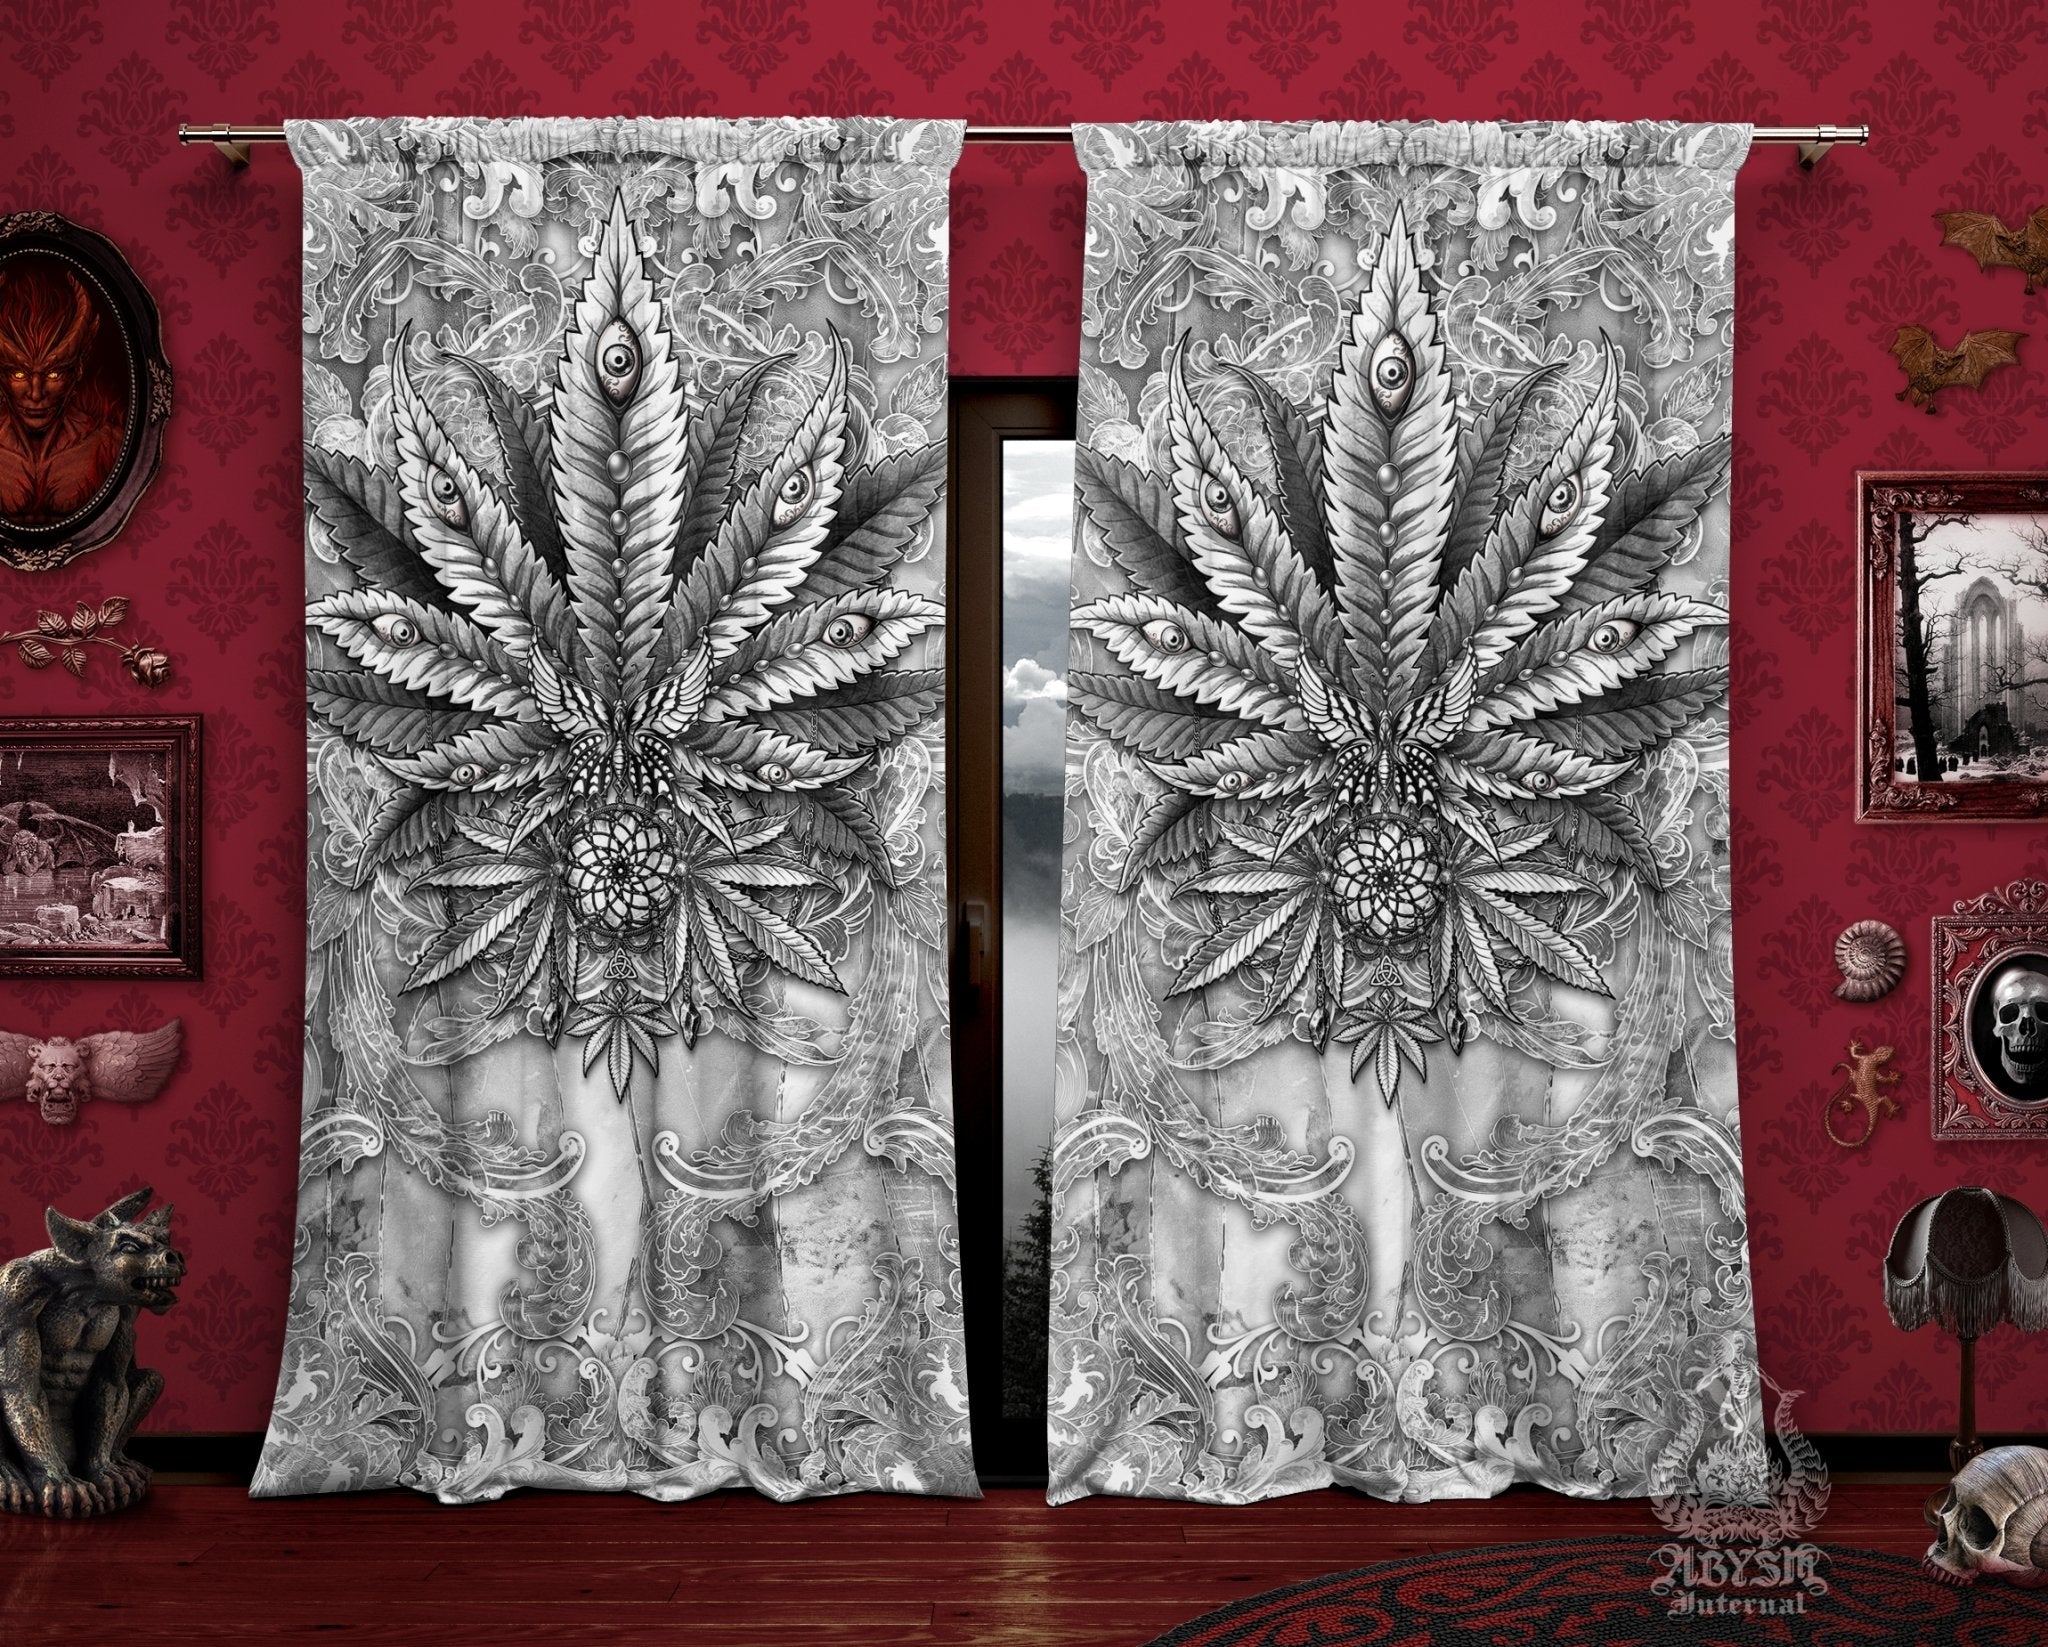 Weed Blackout Curtains, Cannabis Home and Shop Decor, Long Window Panels, Indie 420 Room Art Print - Black and White Goth, Stone - Abysm Internal